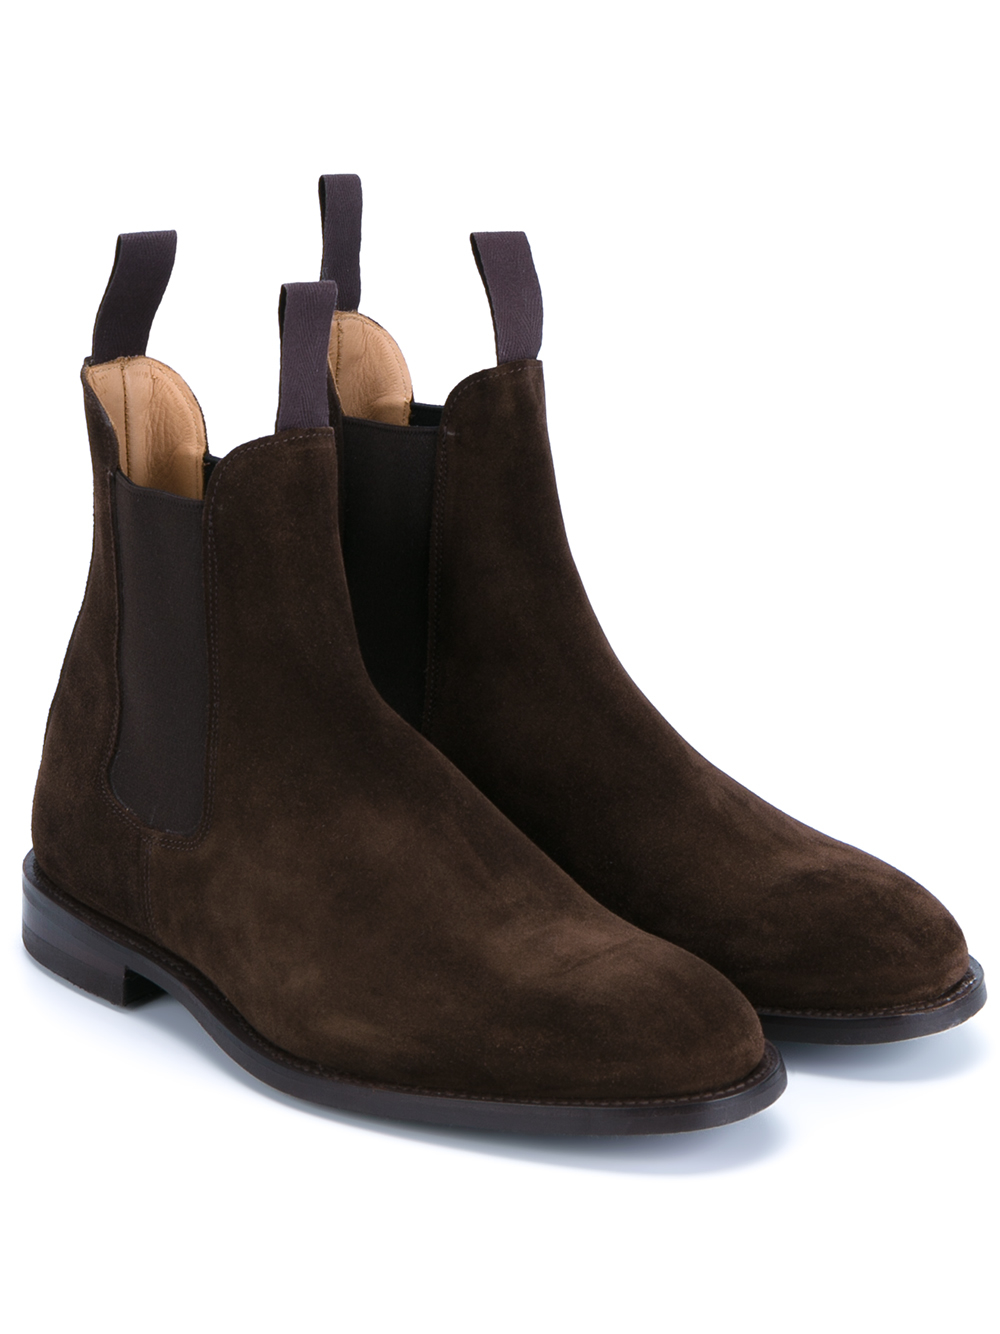 Lyst - Tricker's Chelsea Boots in Brown for Men